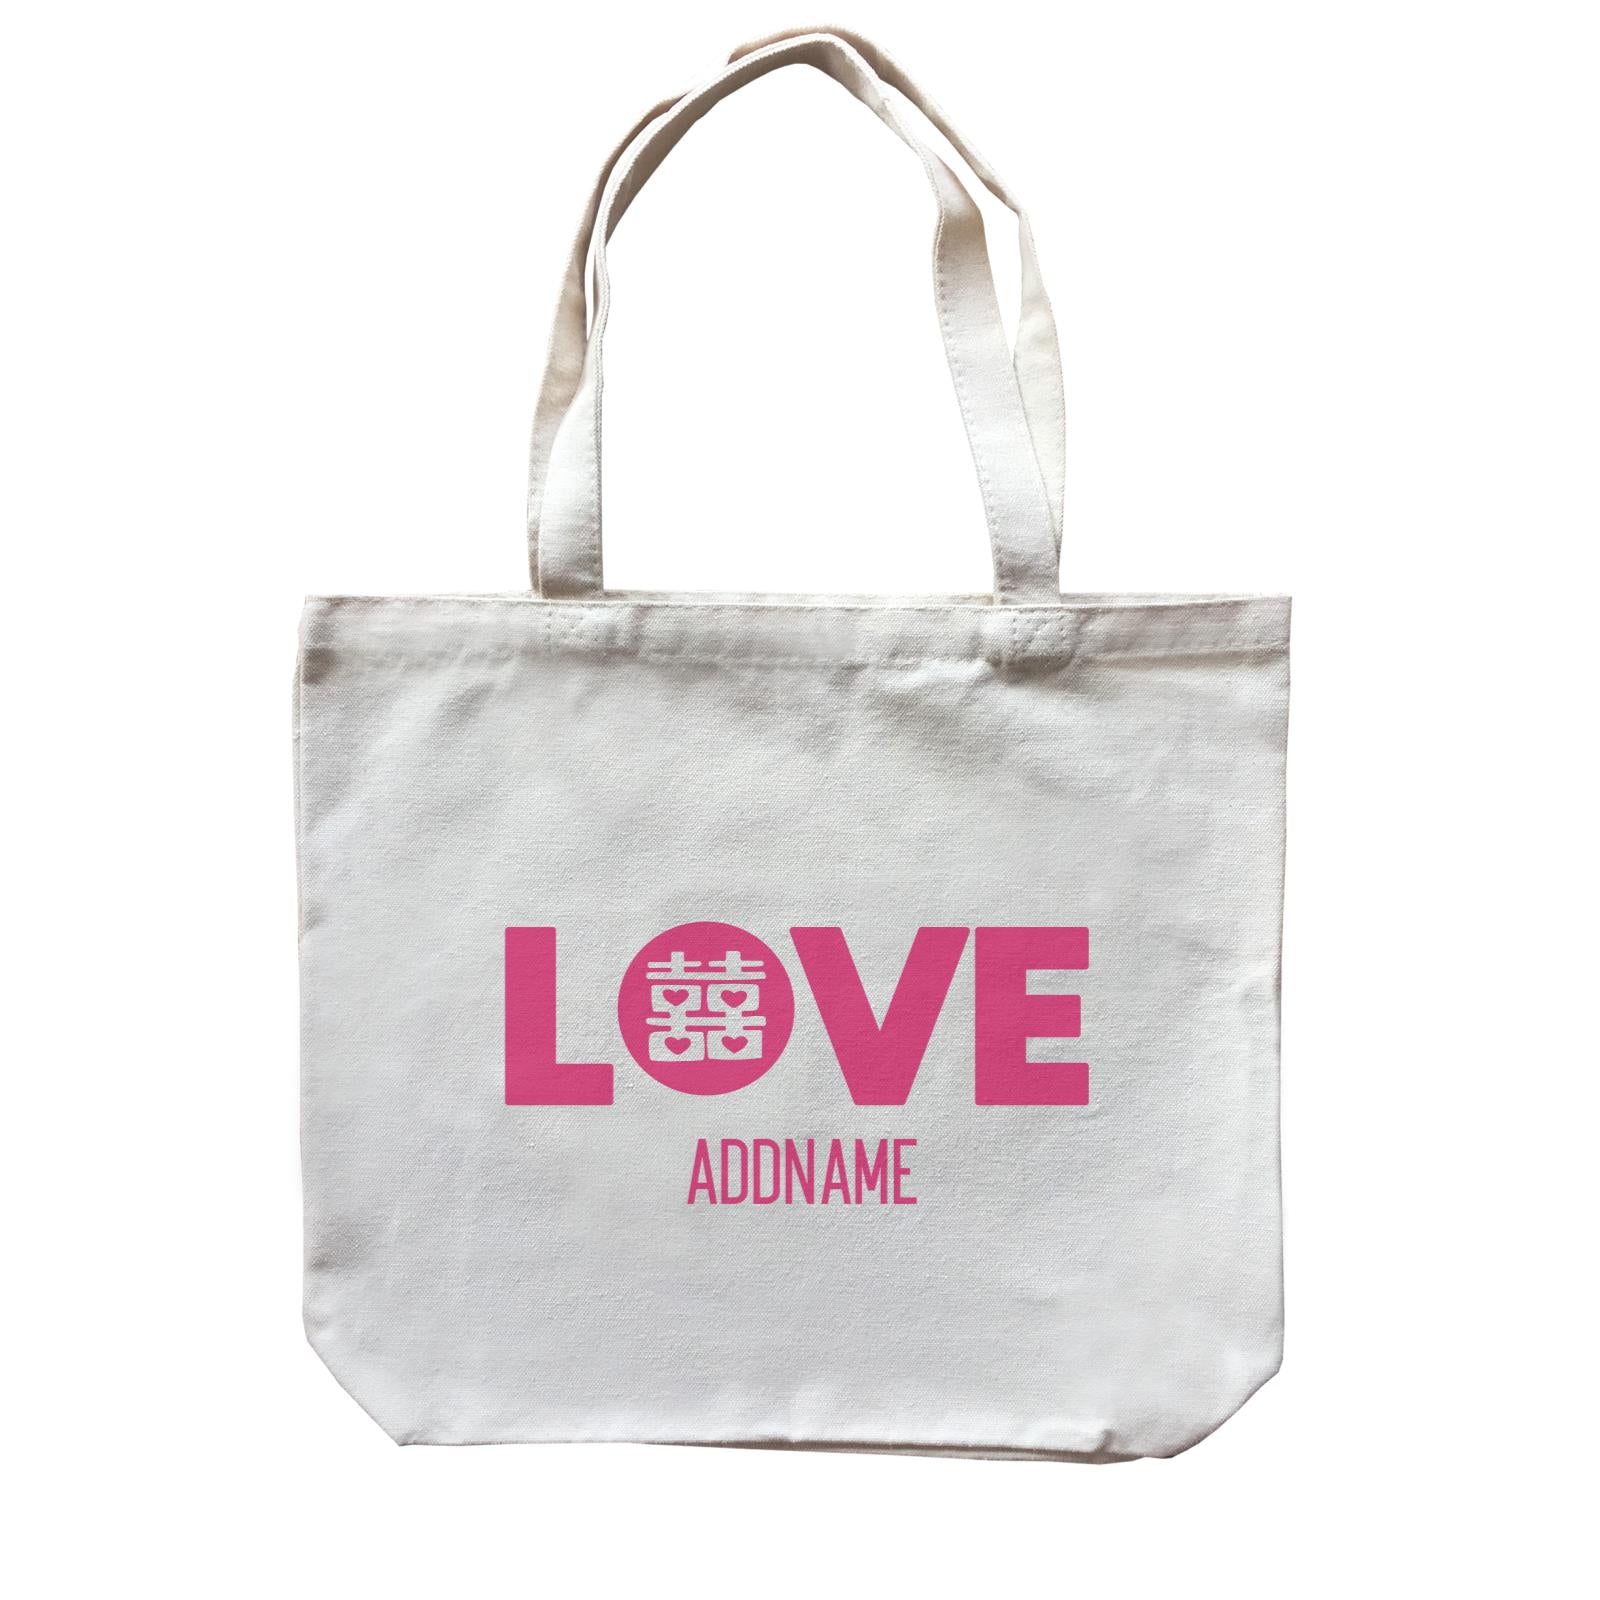 Love In Double Happiness Addname Accessories Canvas Bag